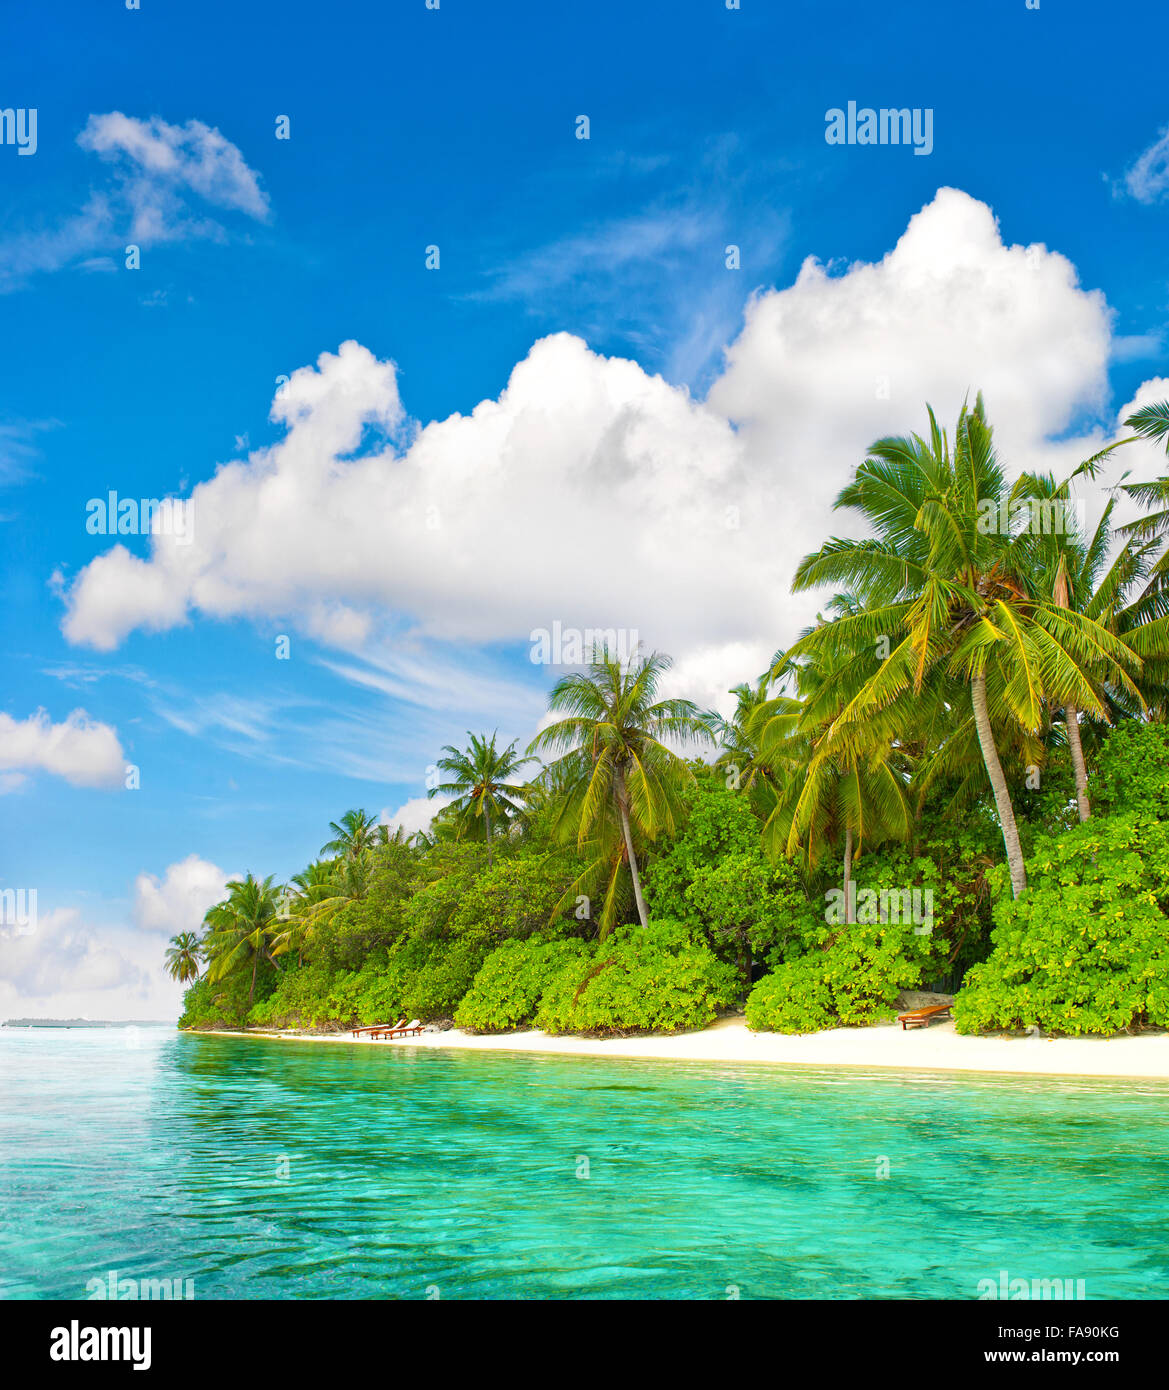 Tropical island beach. Palm trees. Turquoise water. Blue sky Stock Photo